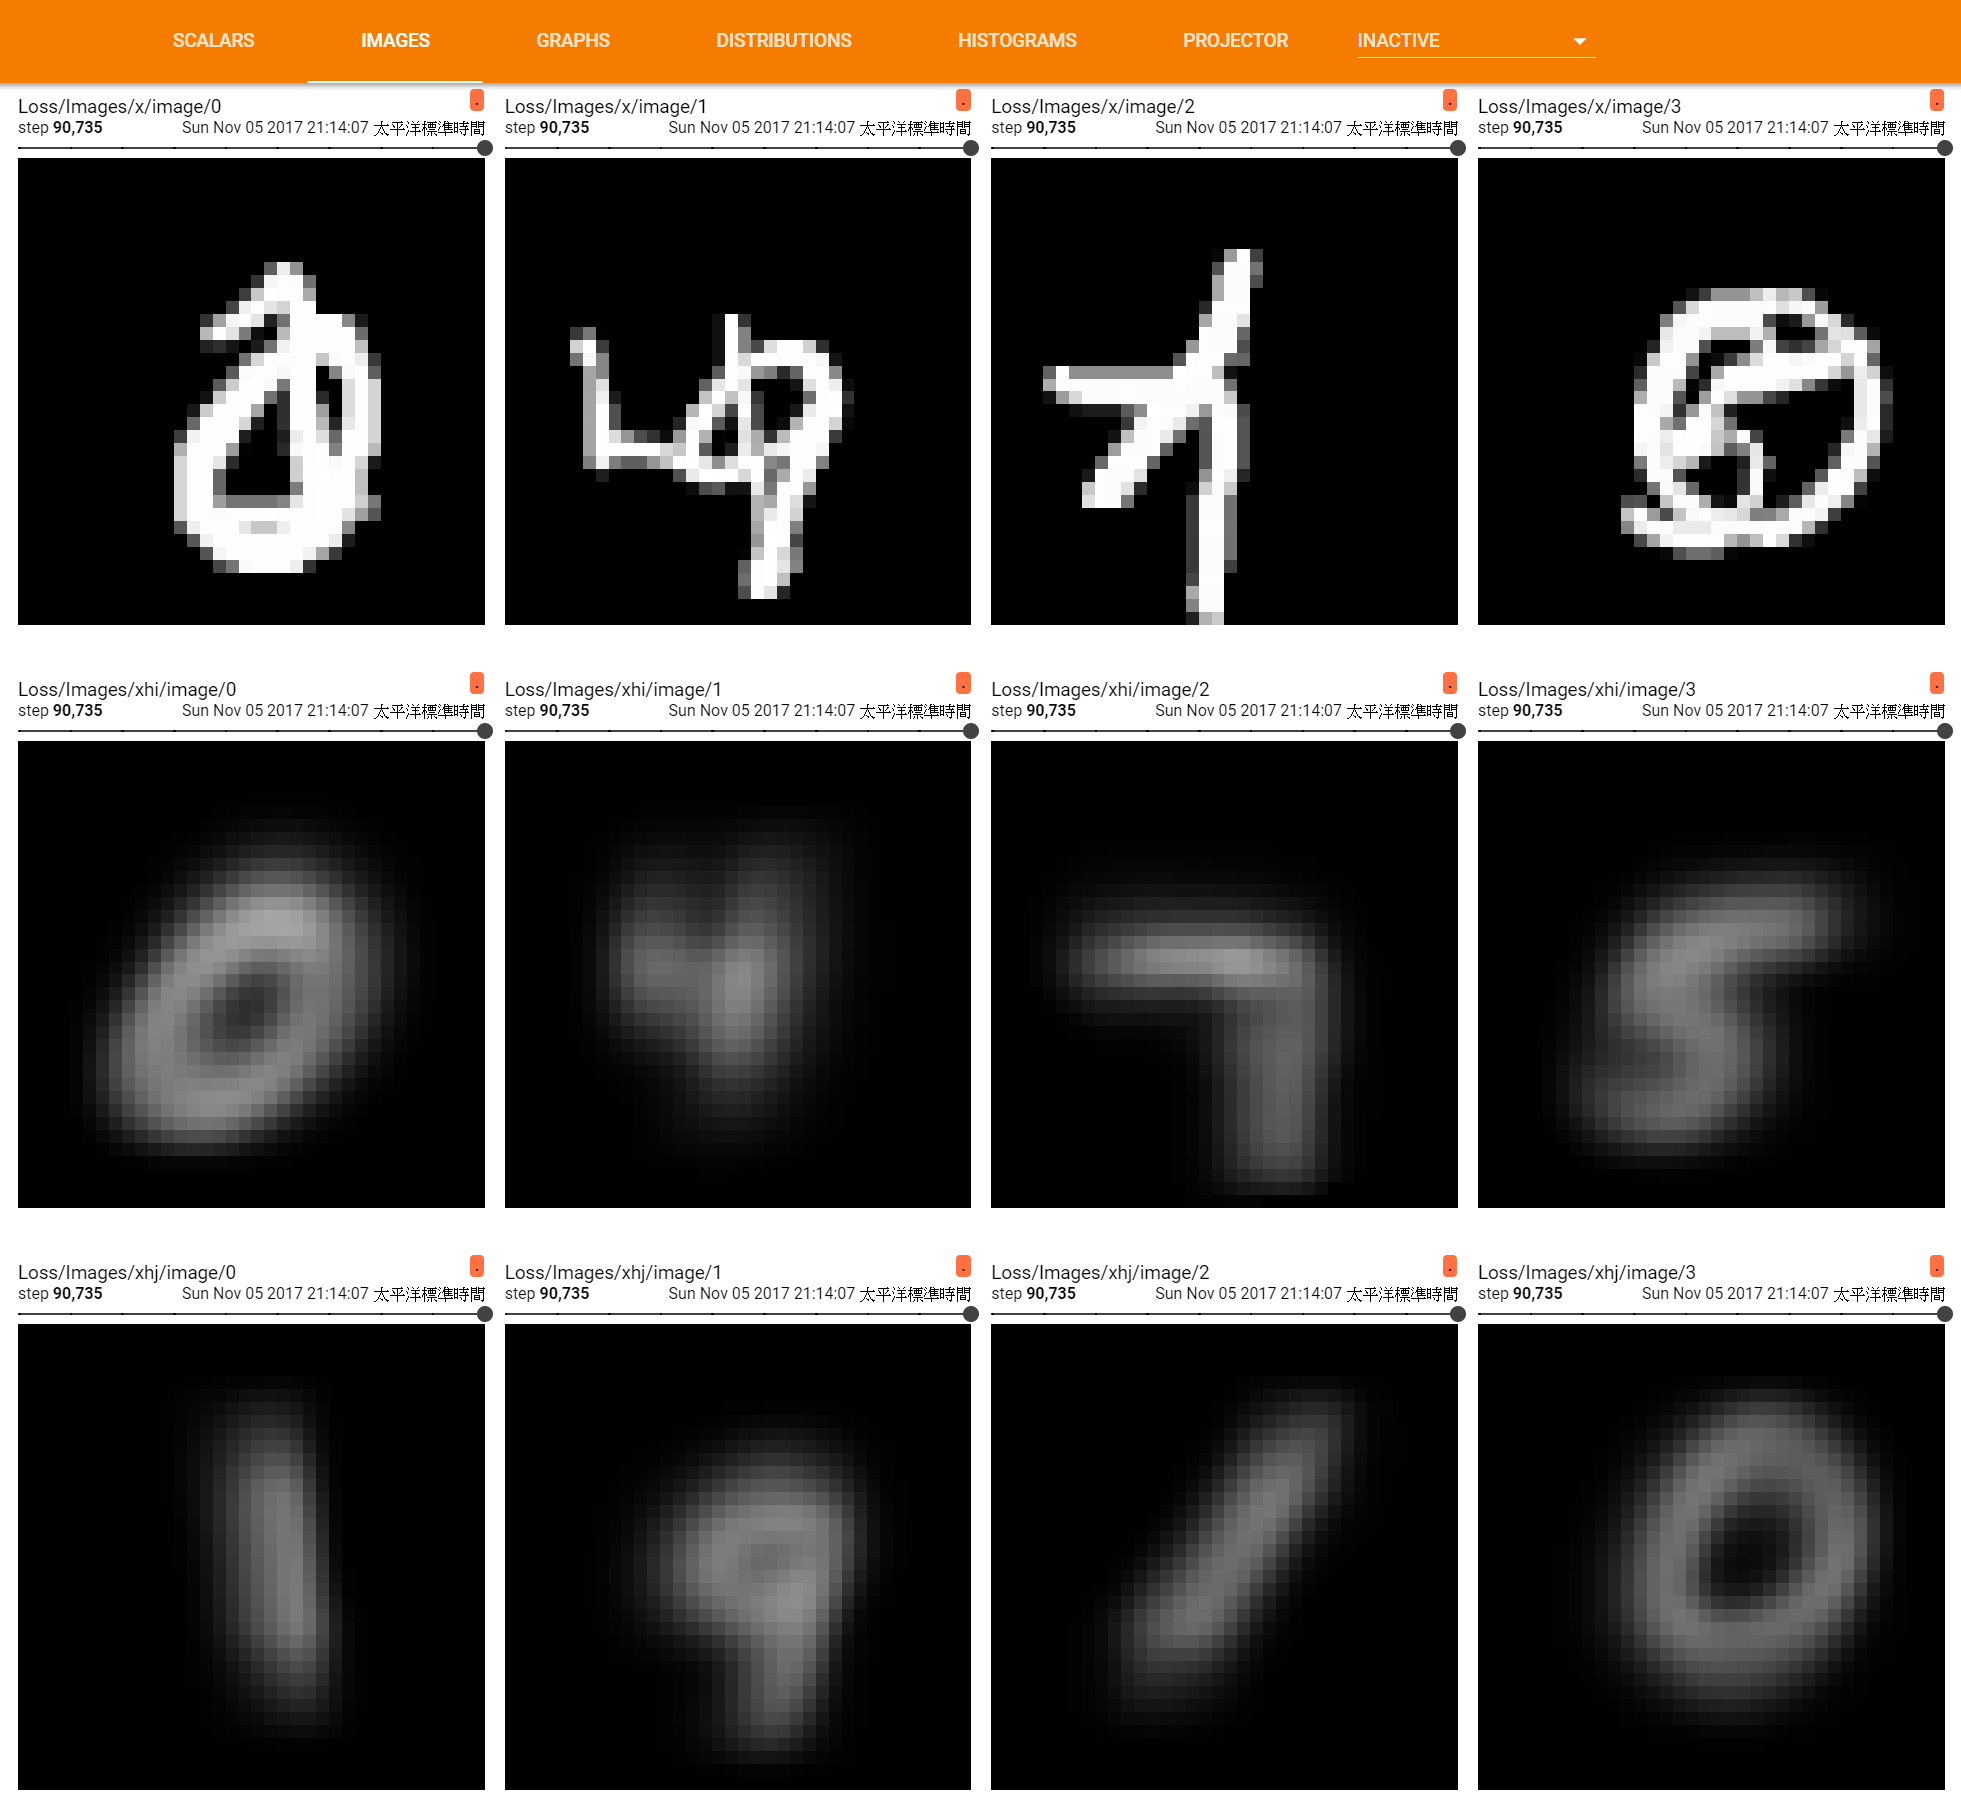 reconstruction from Multi-MNIST